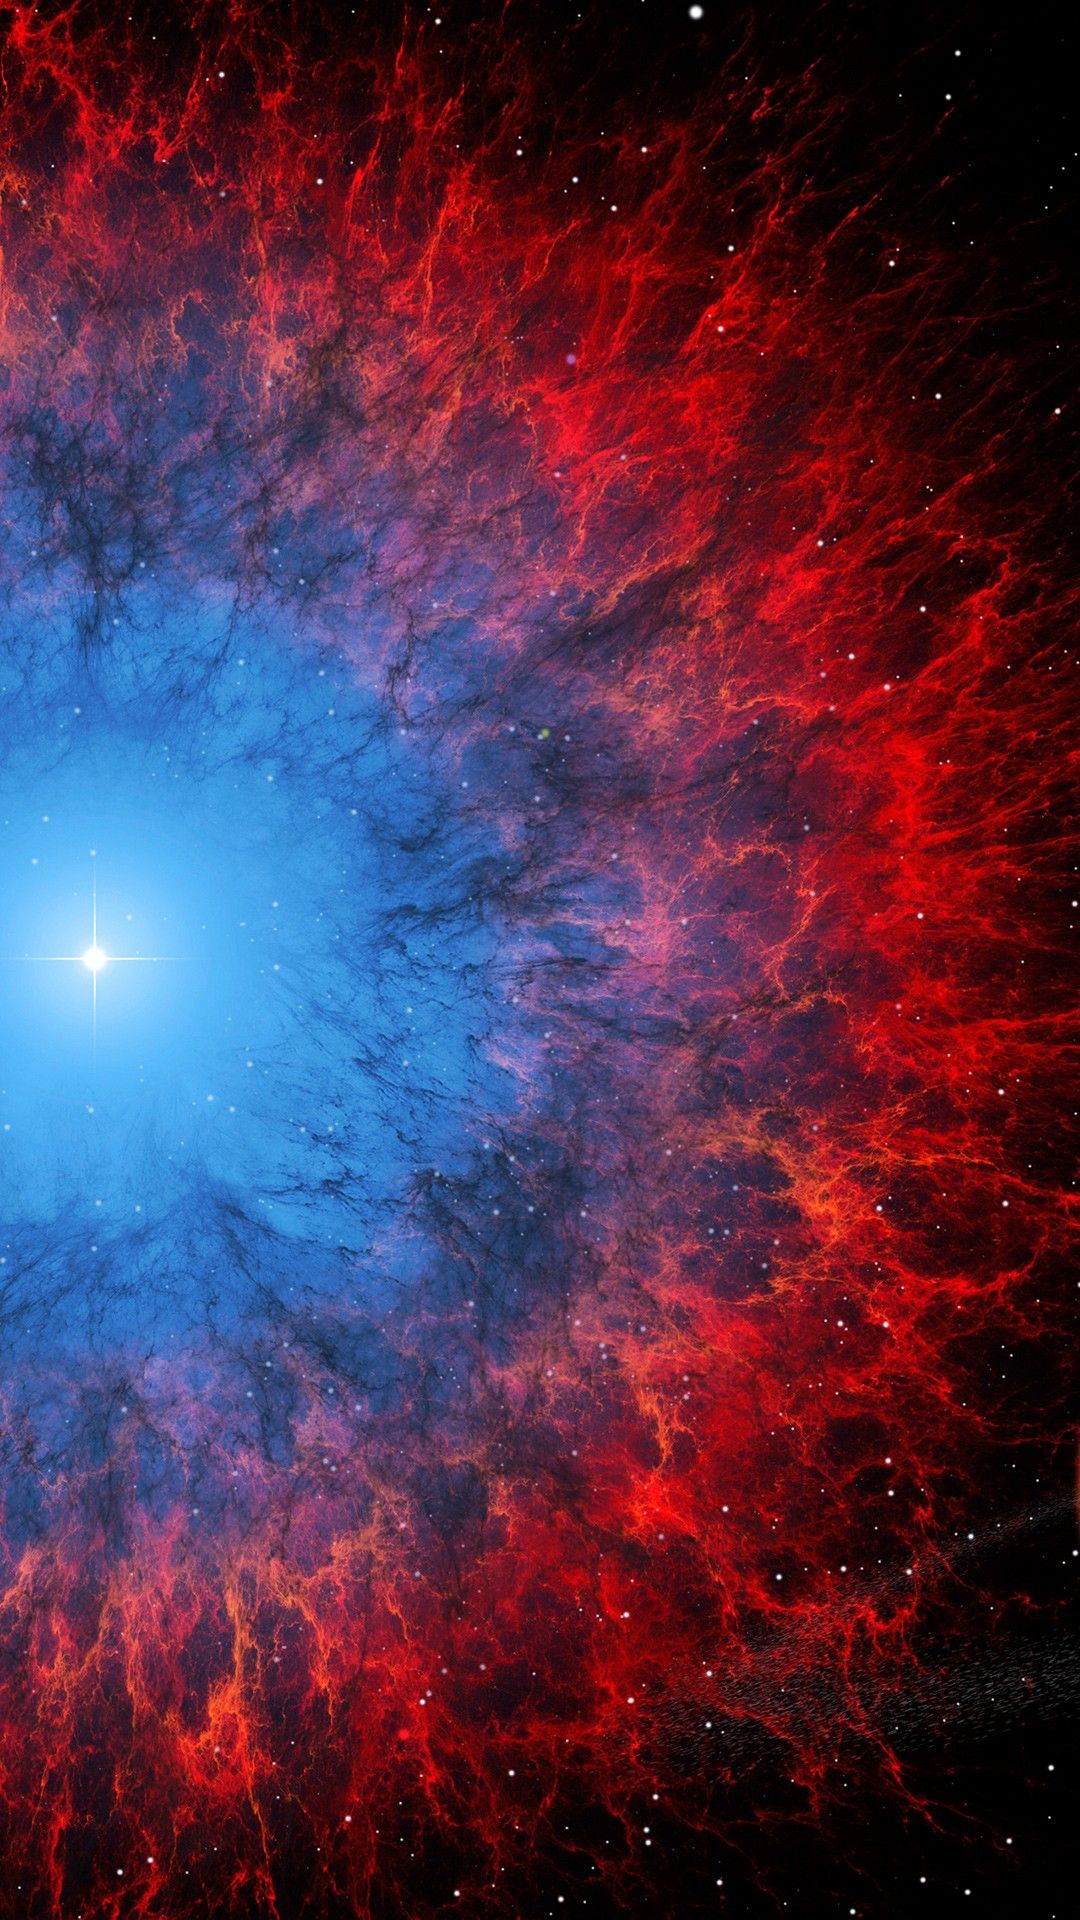 Sky, Nebula, Red, Astronomical object, Blue, Outer space. Wallpaper space, Space gallery, Space artwork